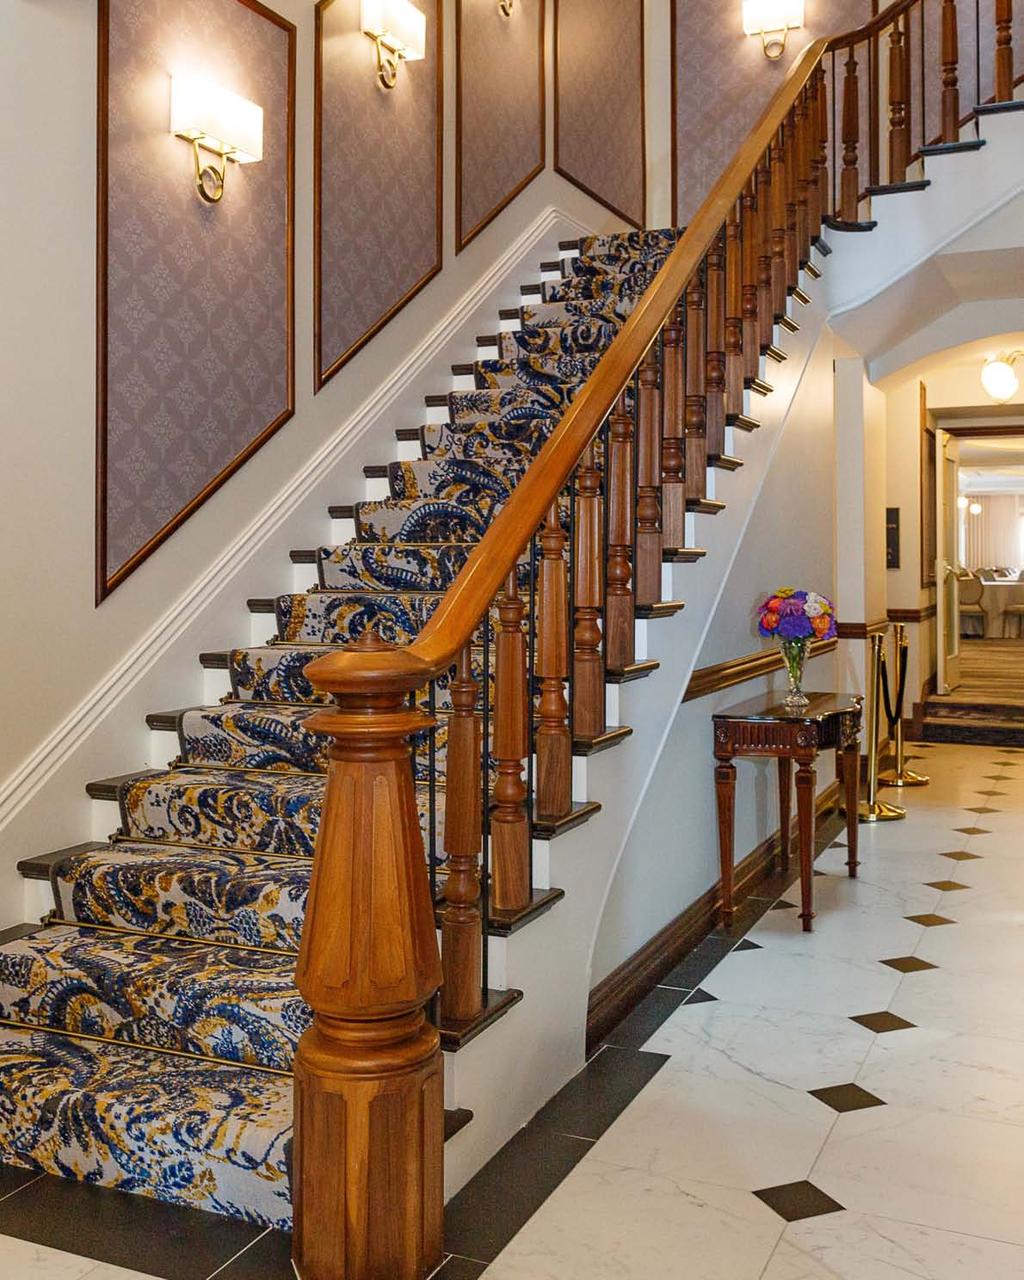 Aesthetic value: Four story grand staircase is quintesential element of historic 1877 Adelphi Hotel. Reconstructed to allow the existing walnut balustrade to be reinstalled.